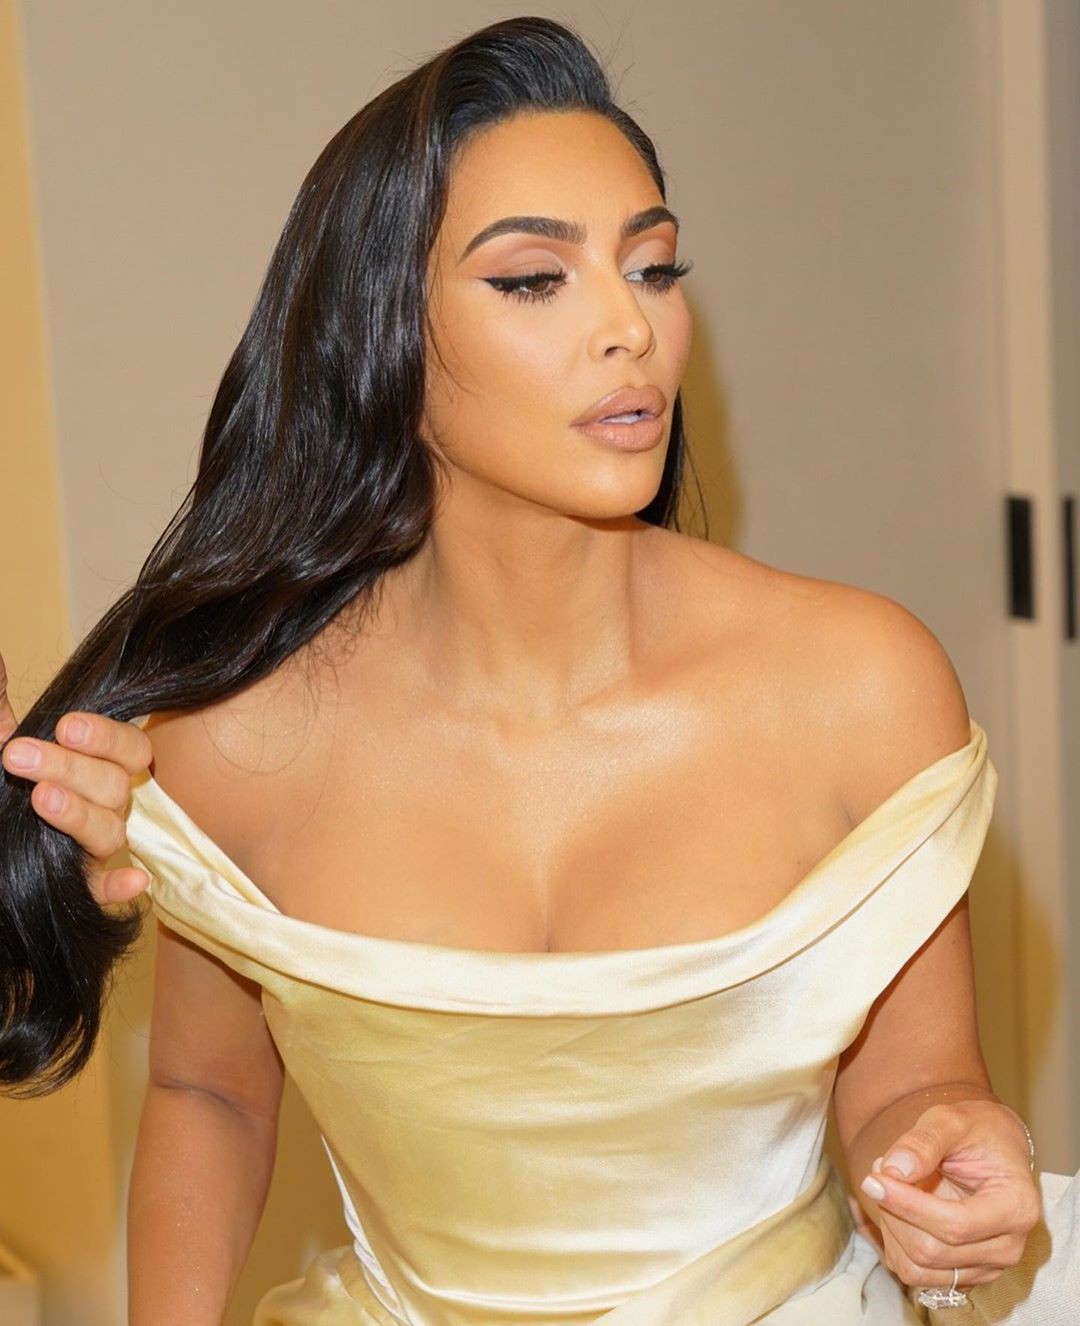 How many of you are females fans Kim Kardashian Stylevore: Celebrity Outfit Ideas,  Most Famous Celebrity,  Kim Kardashian Fashion,  Kim,  Kardashian,  Stylevore,  Kim Kardashian Lips,  Kim Kardashian Hairstyle,  Kim Kardashian  